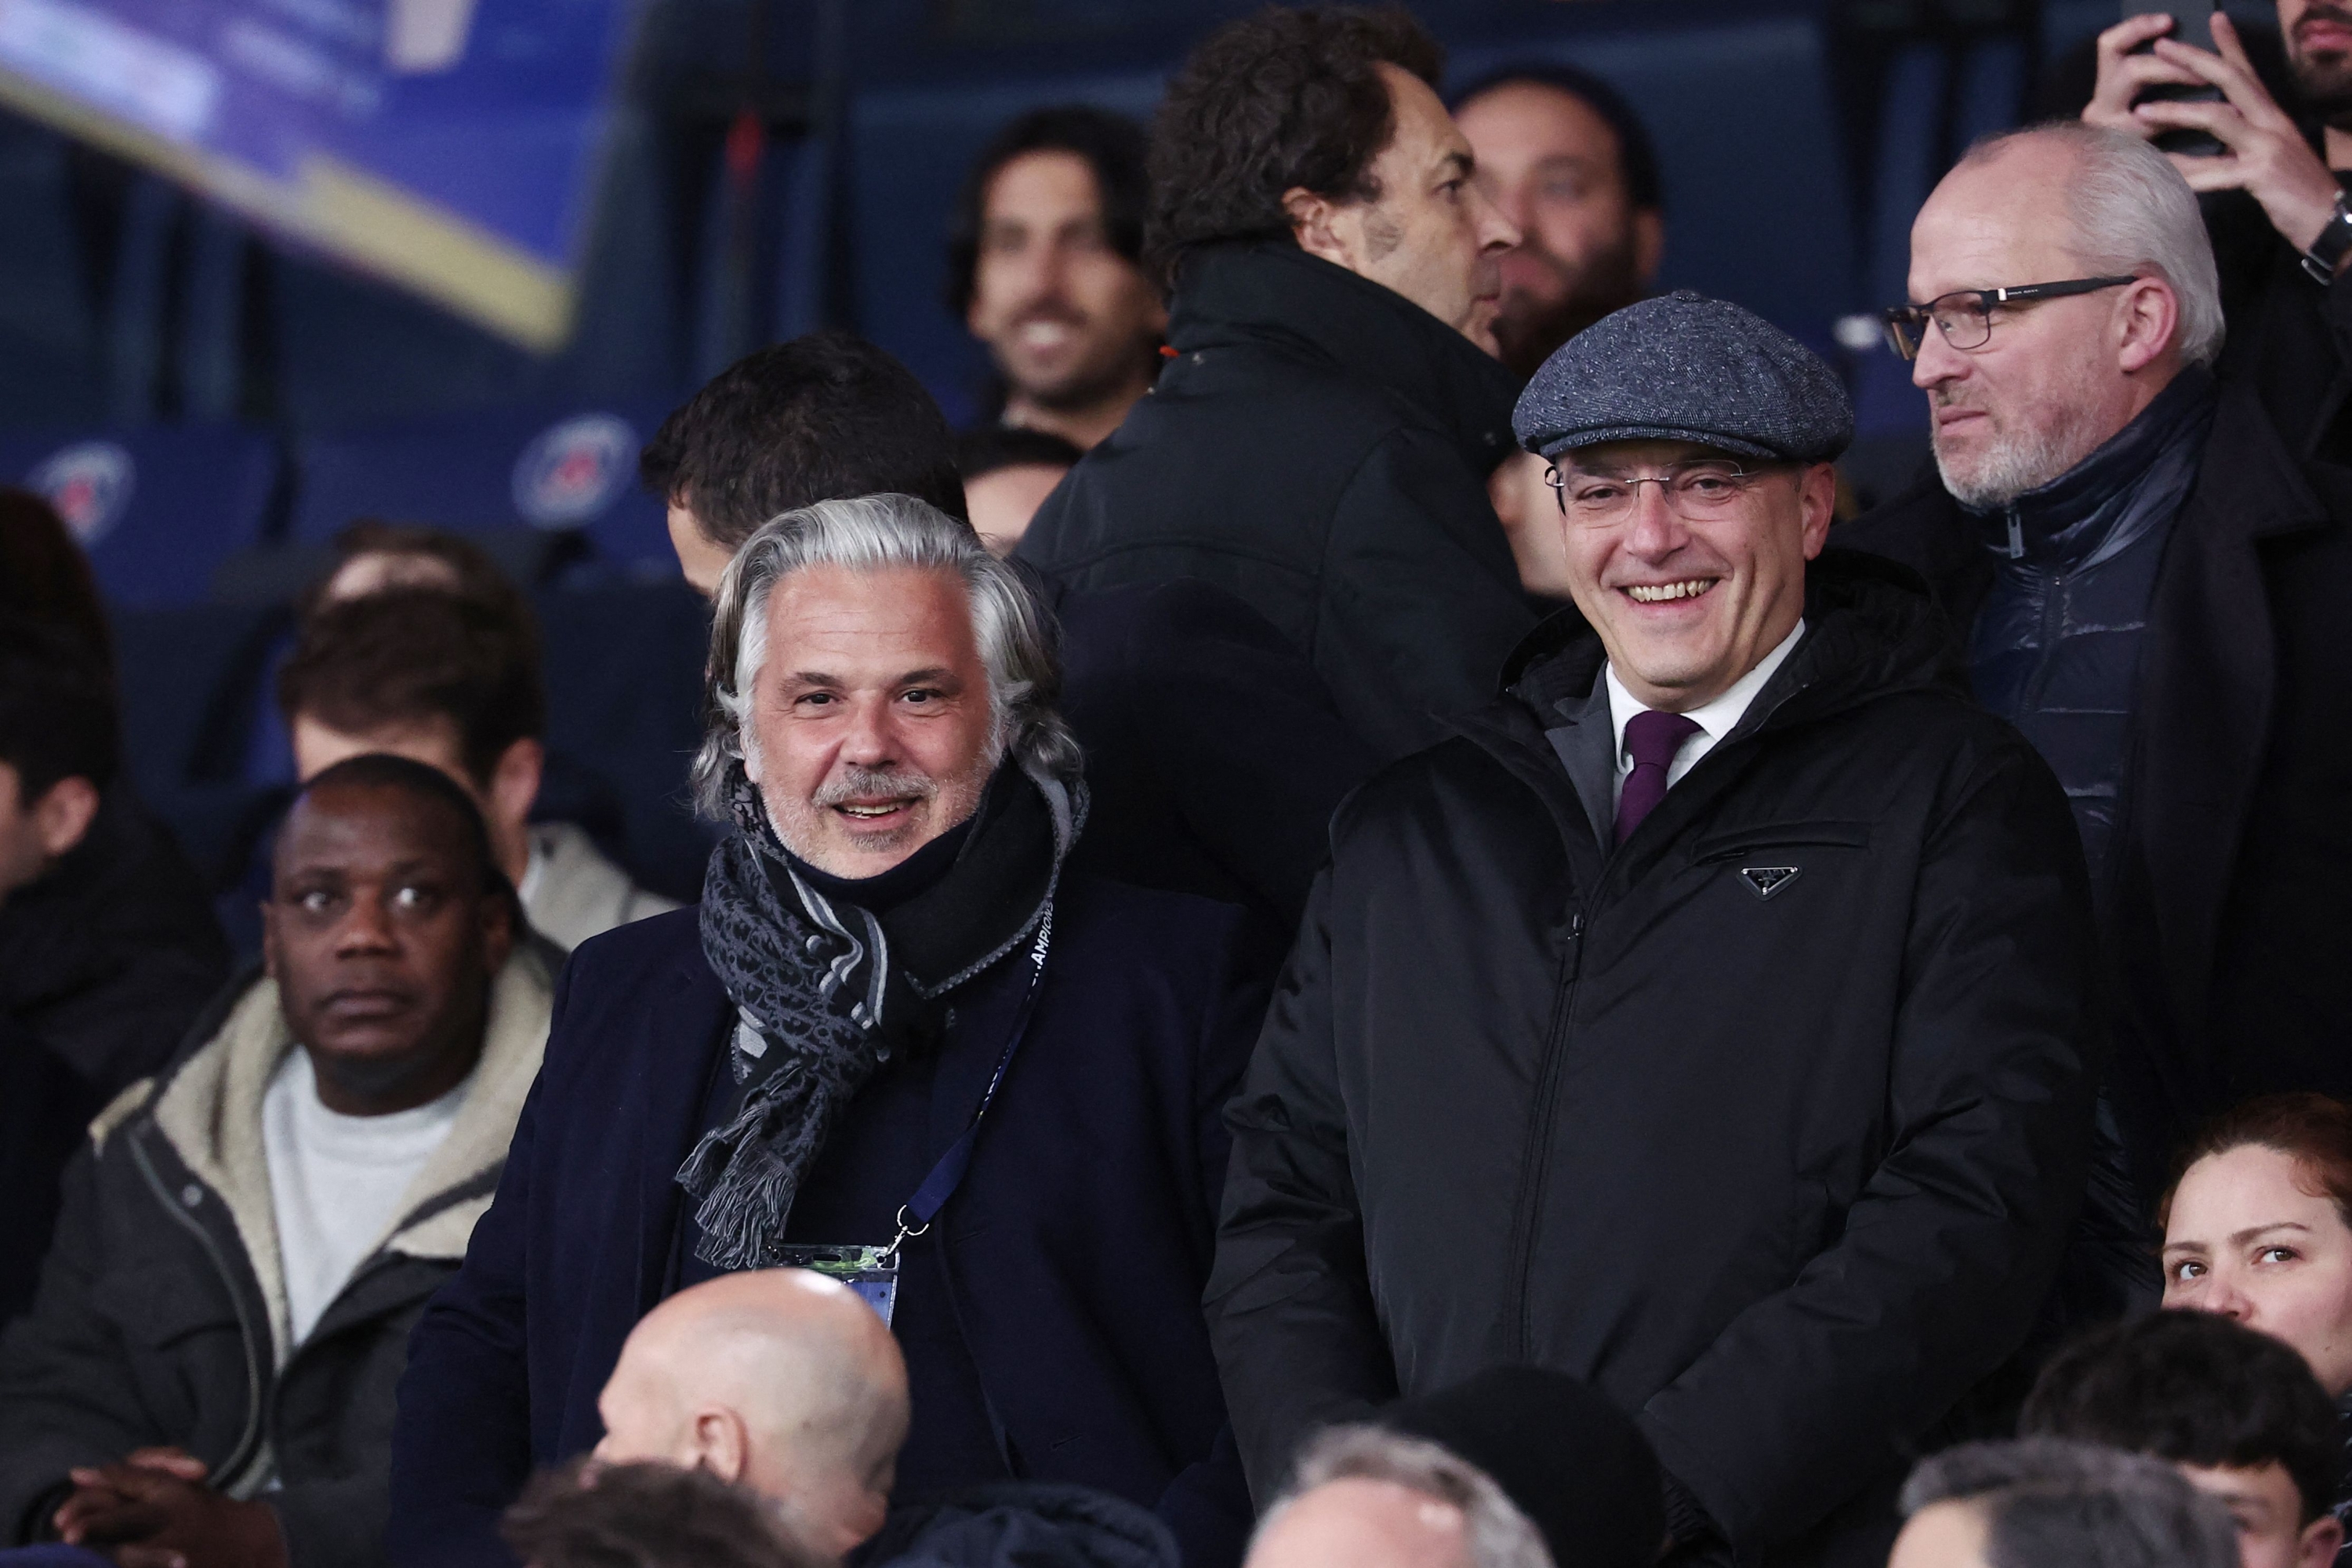 French Football Ligue (LFP) President Vincent Labrune (C) and  President of Toulouse football club Damien Comolli (R)  attends the French Champions' Trophy (Trophee des Champions) football match between Paris Saint-Germain (PSG) and Toulouse FC at the Parc des Princes stadium in Paris on January 3, 2024. (Photo by FRANCK FIFE / AFP)